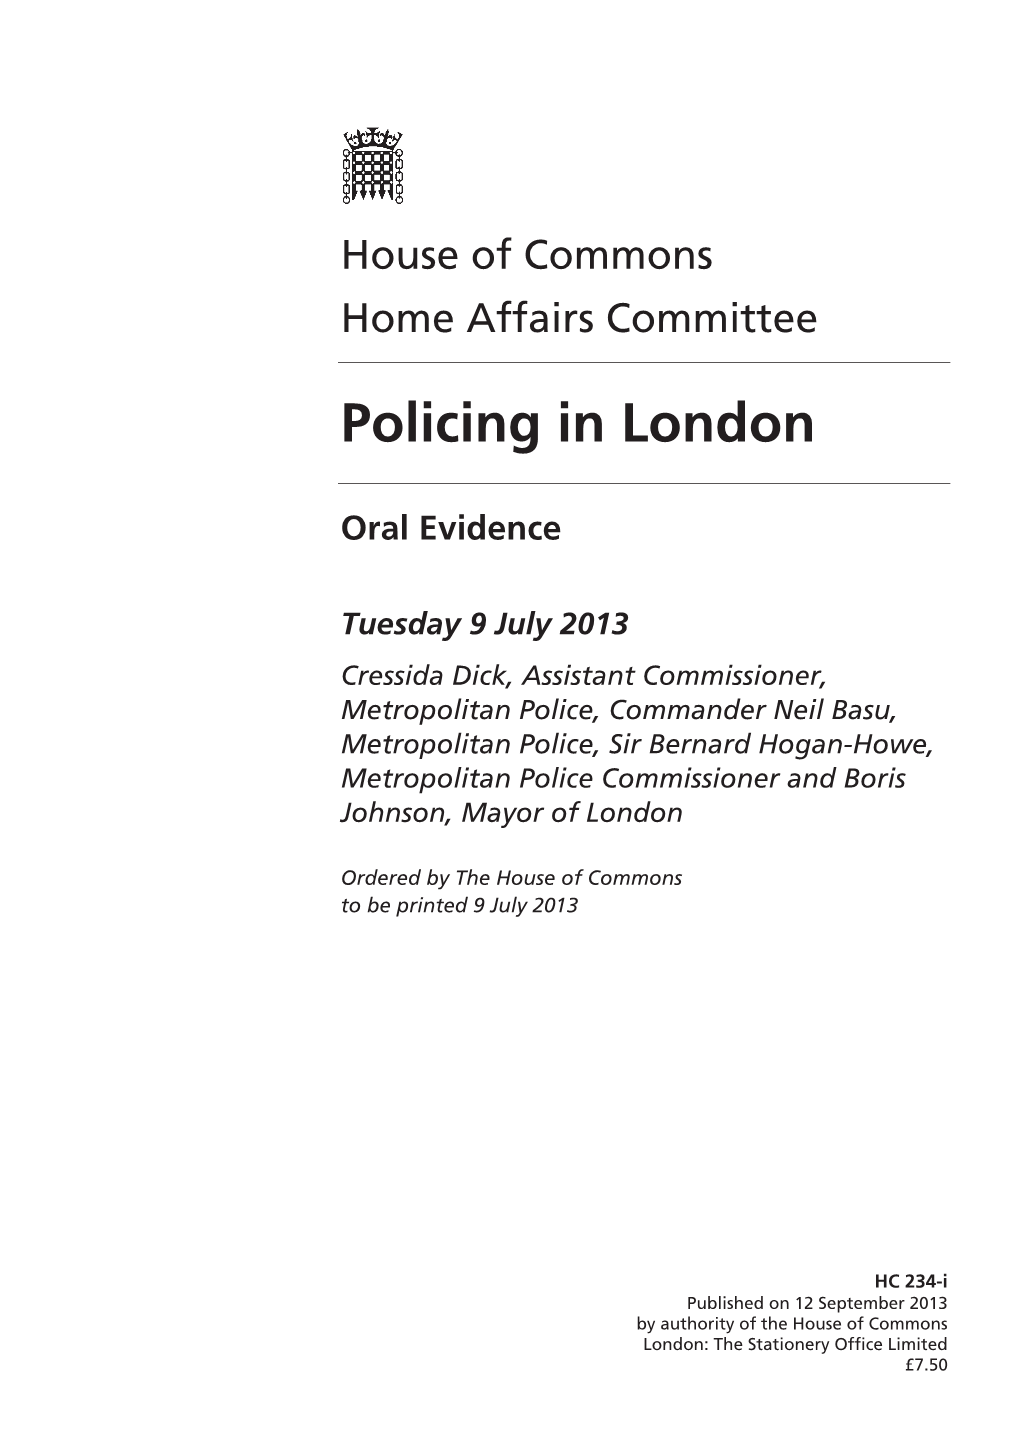 Policing in London